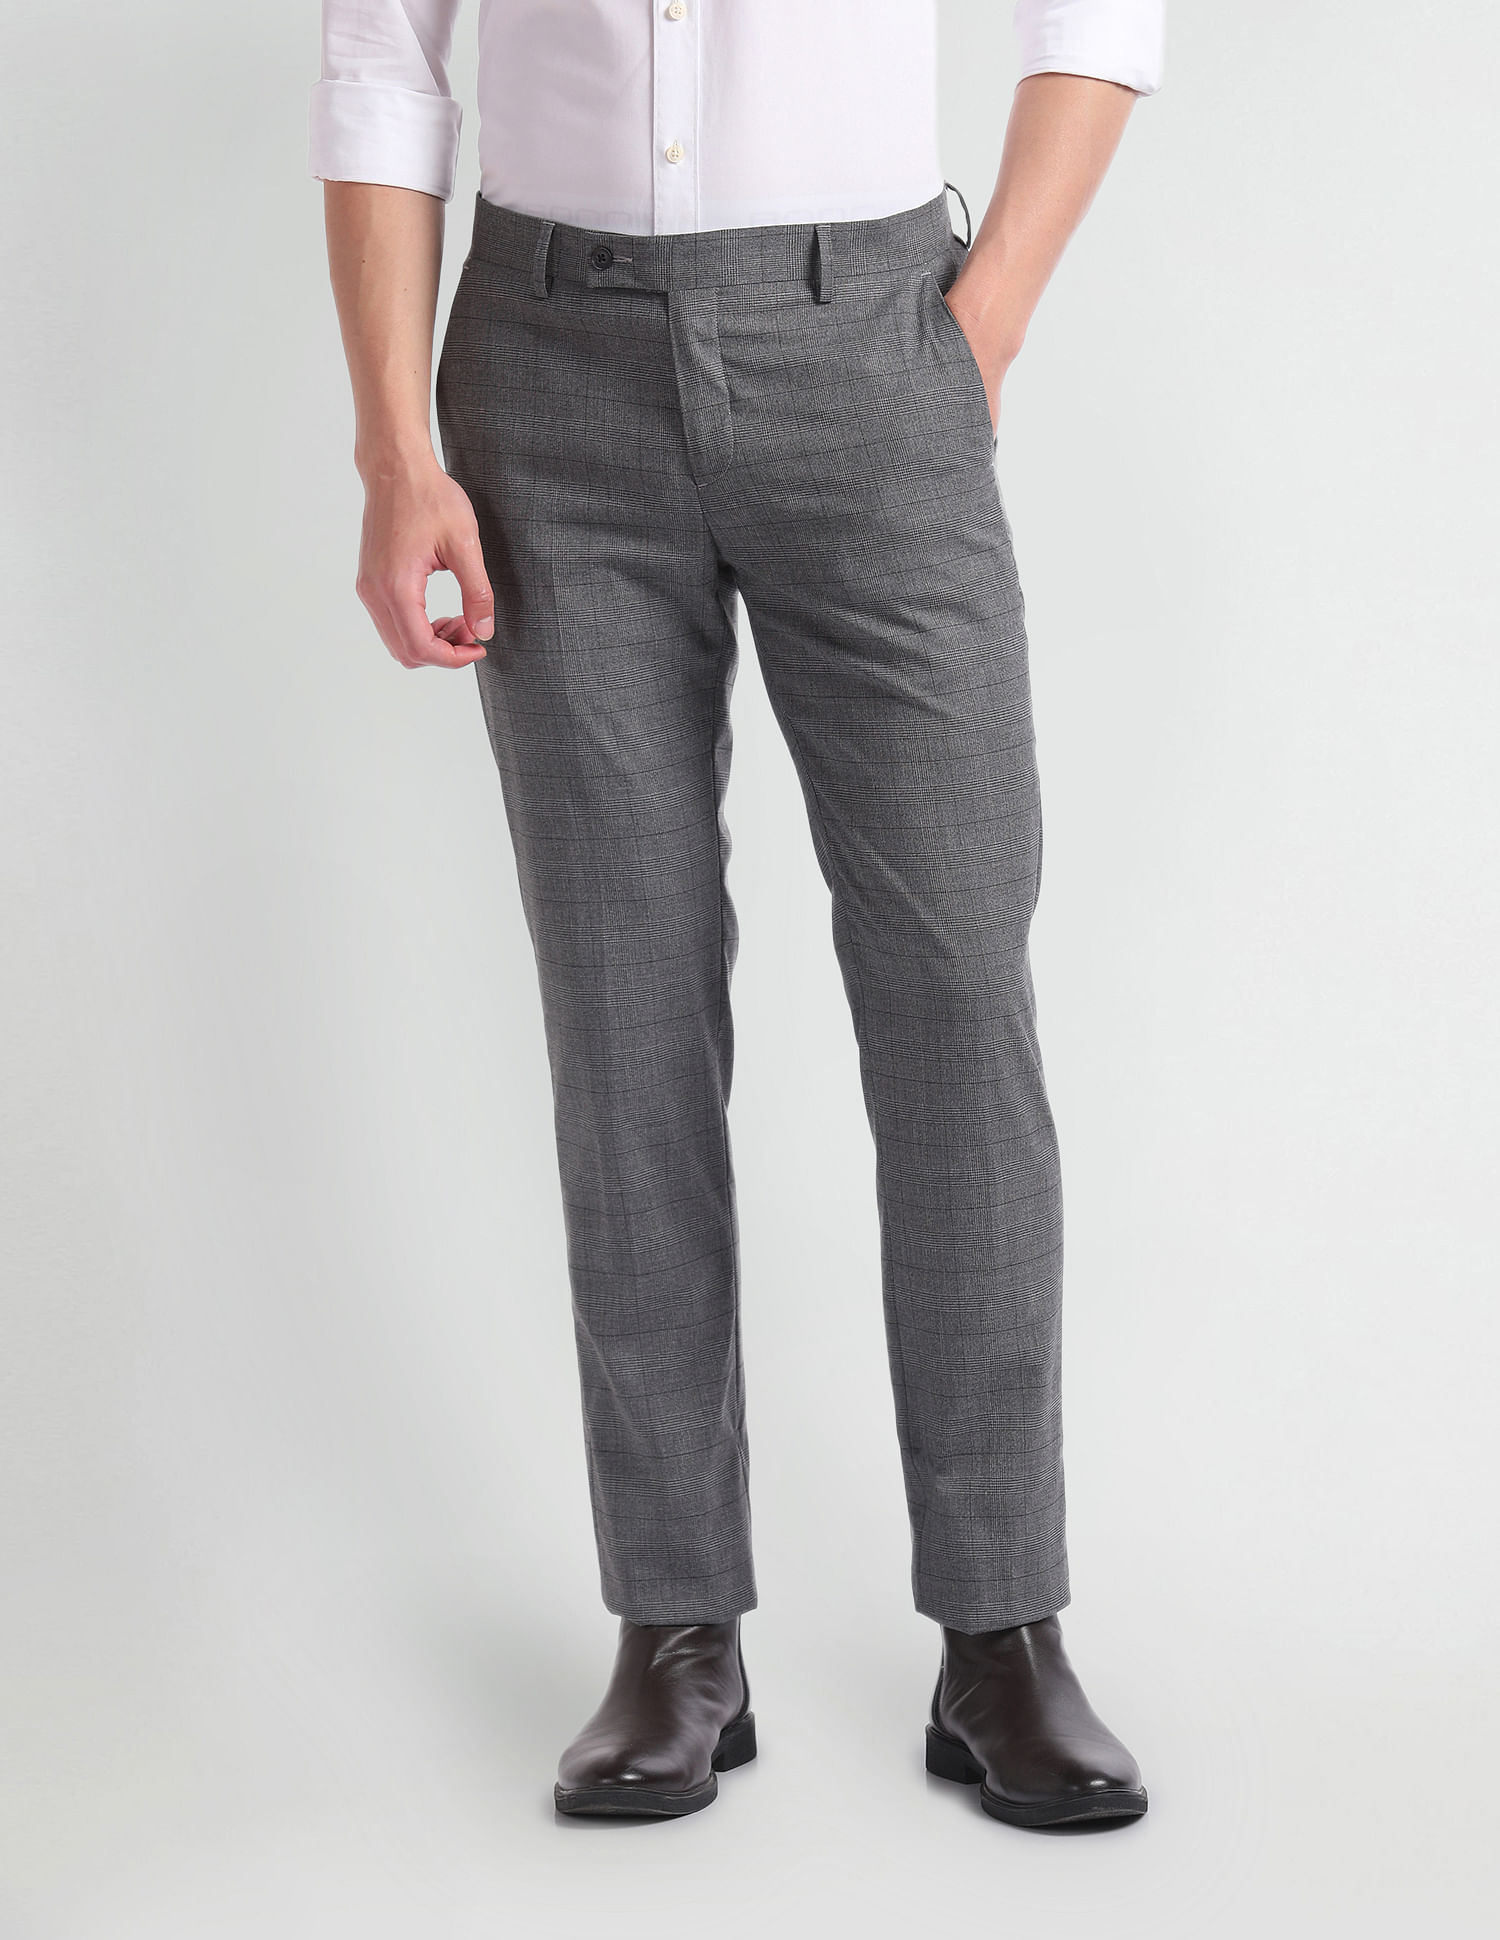 Grey Check Slim Leg Pants #grey #check #trousers #greychecktrousers Grey  Check Slim Leg Pants Give your smart ca… | Smart casual dress, Smart casual  outfit, Clothes